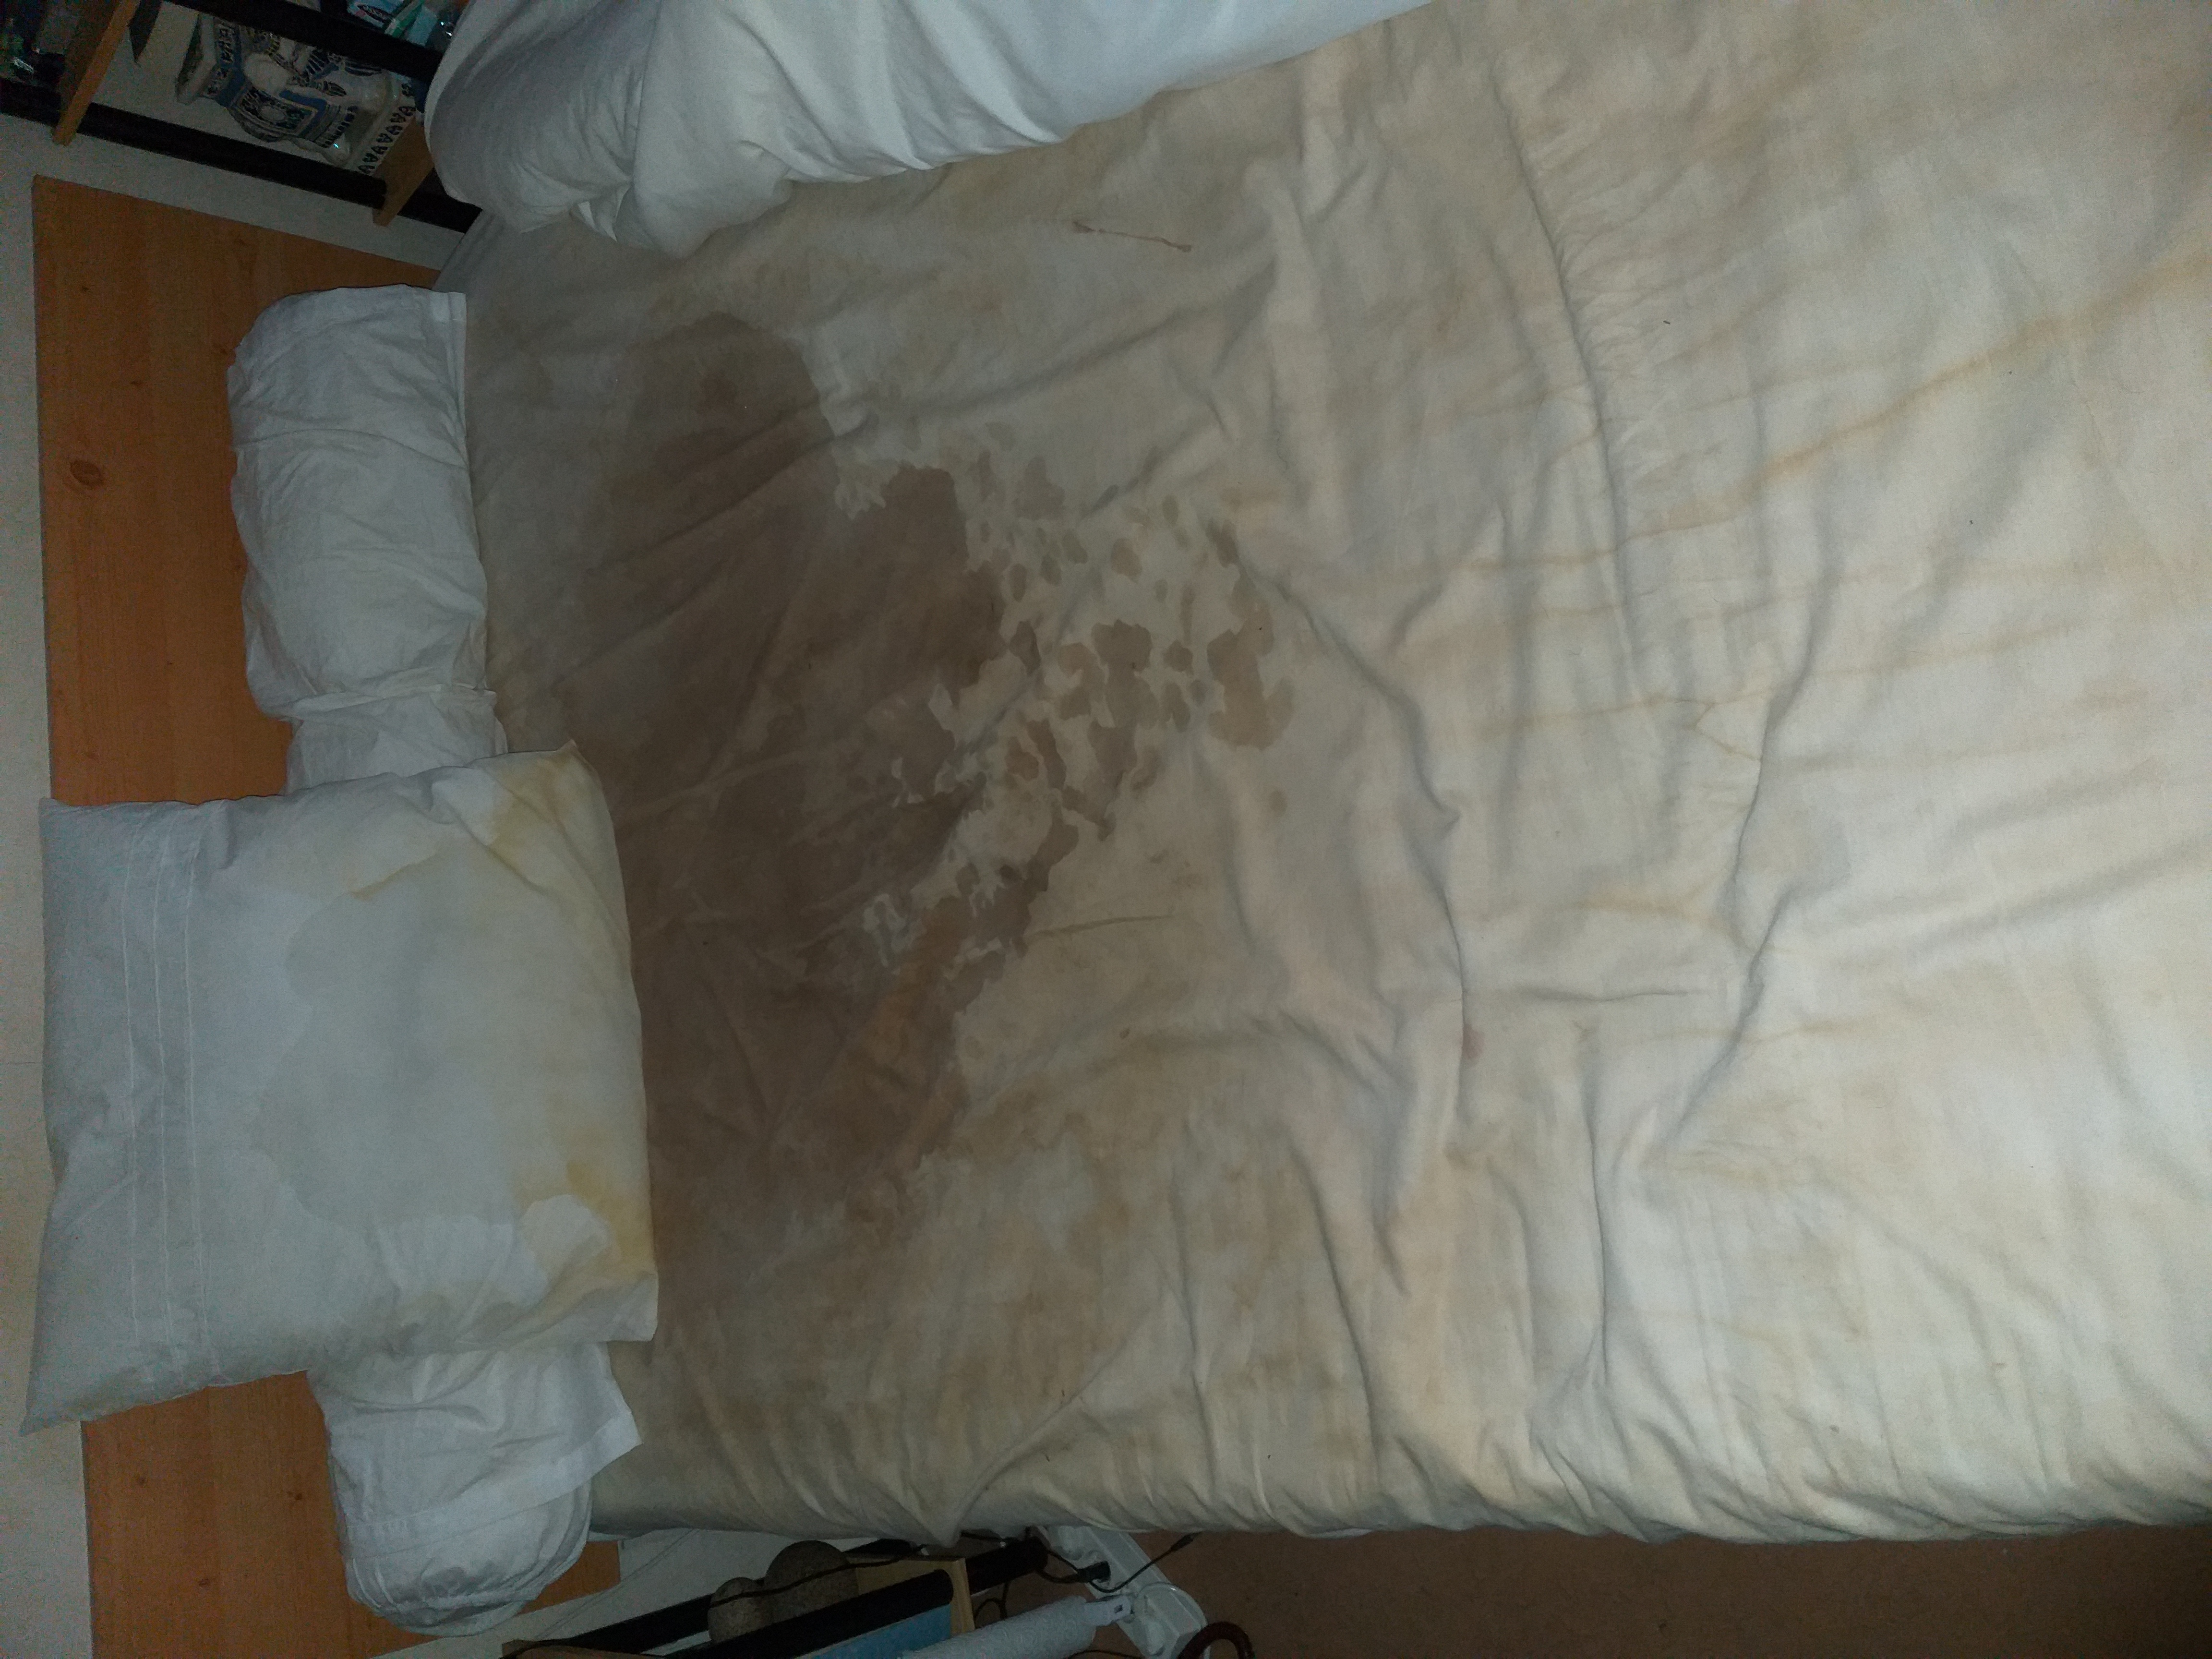 My dirty stinky bed